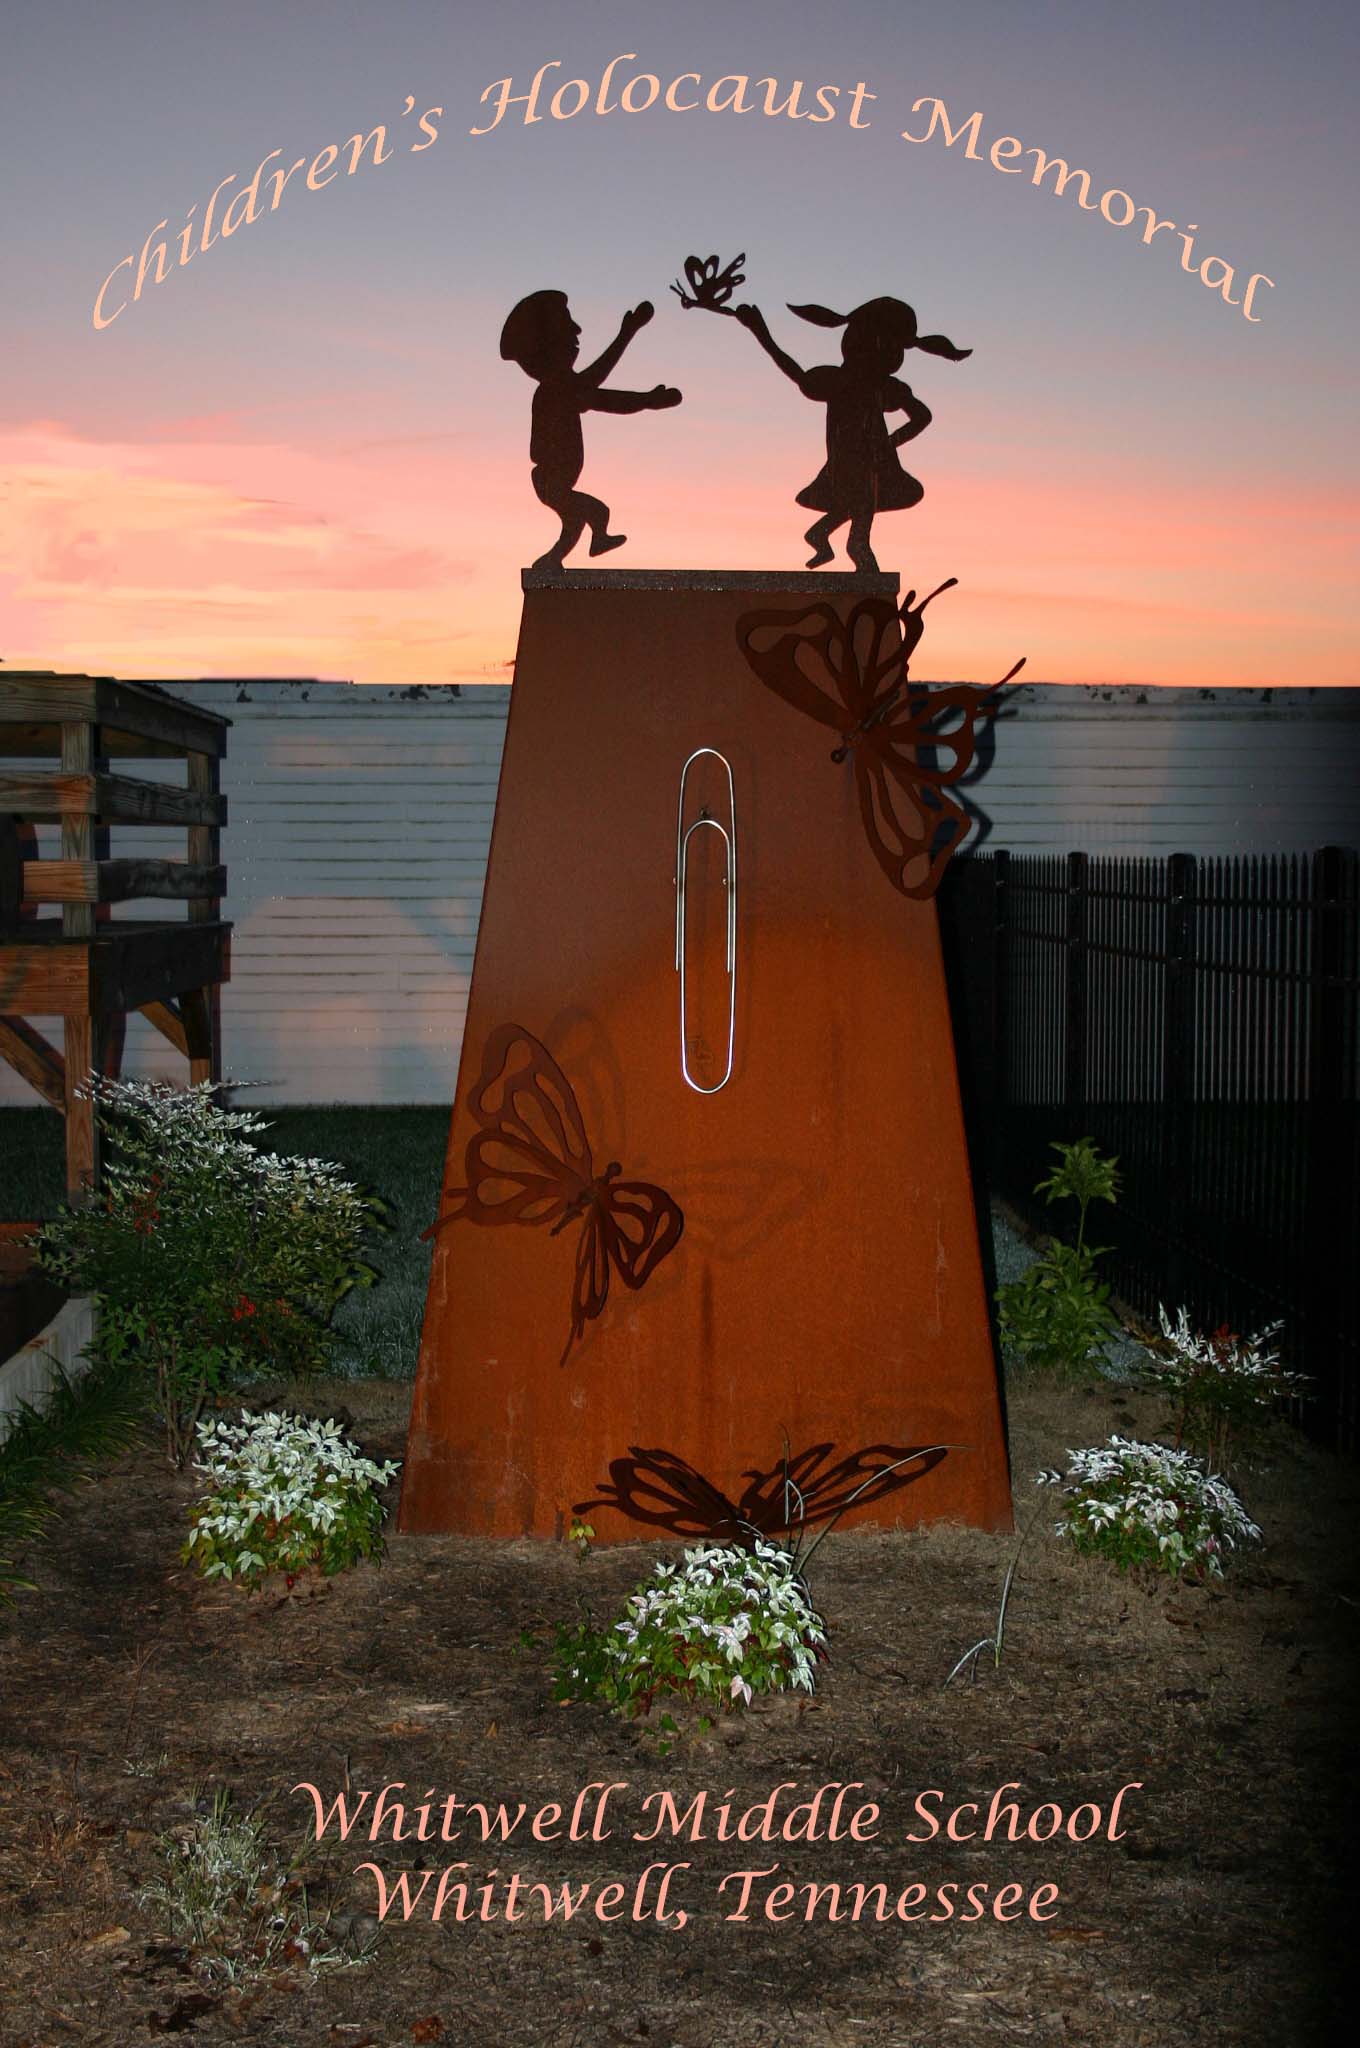 Statue dedicated to the children lost in the Holocaust